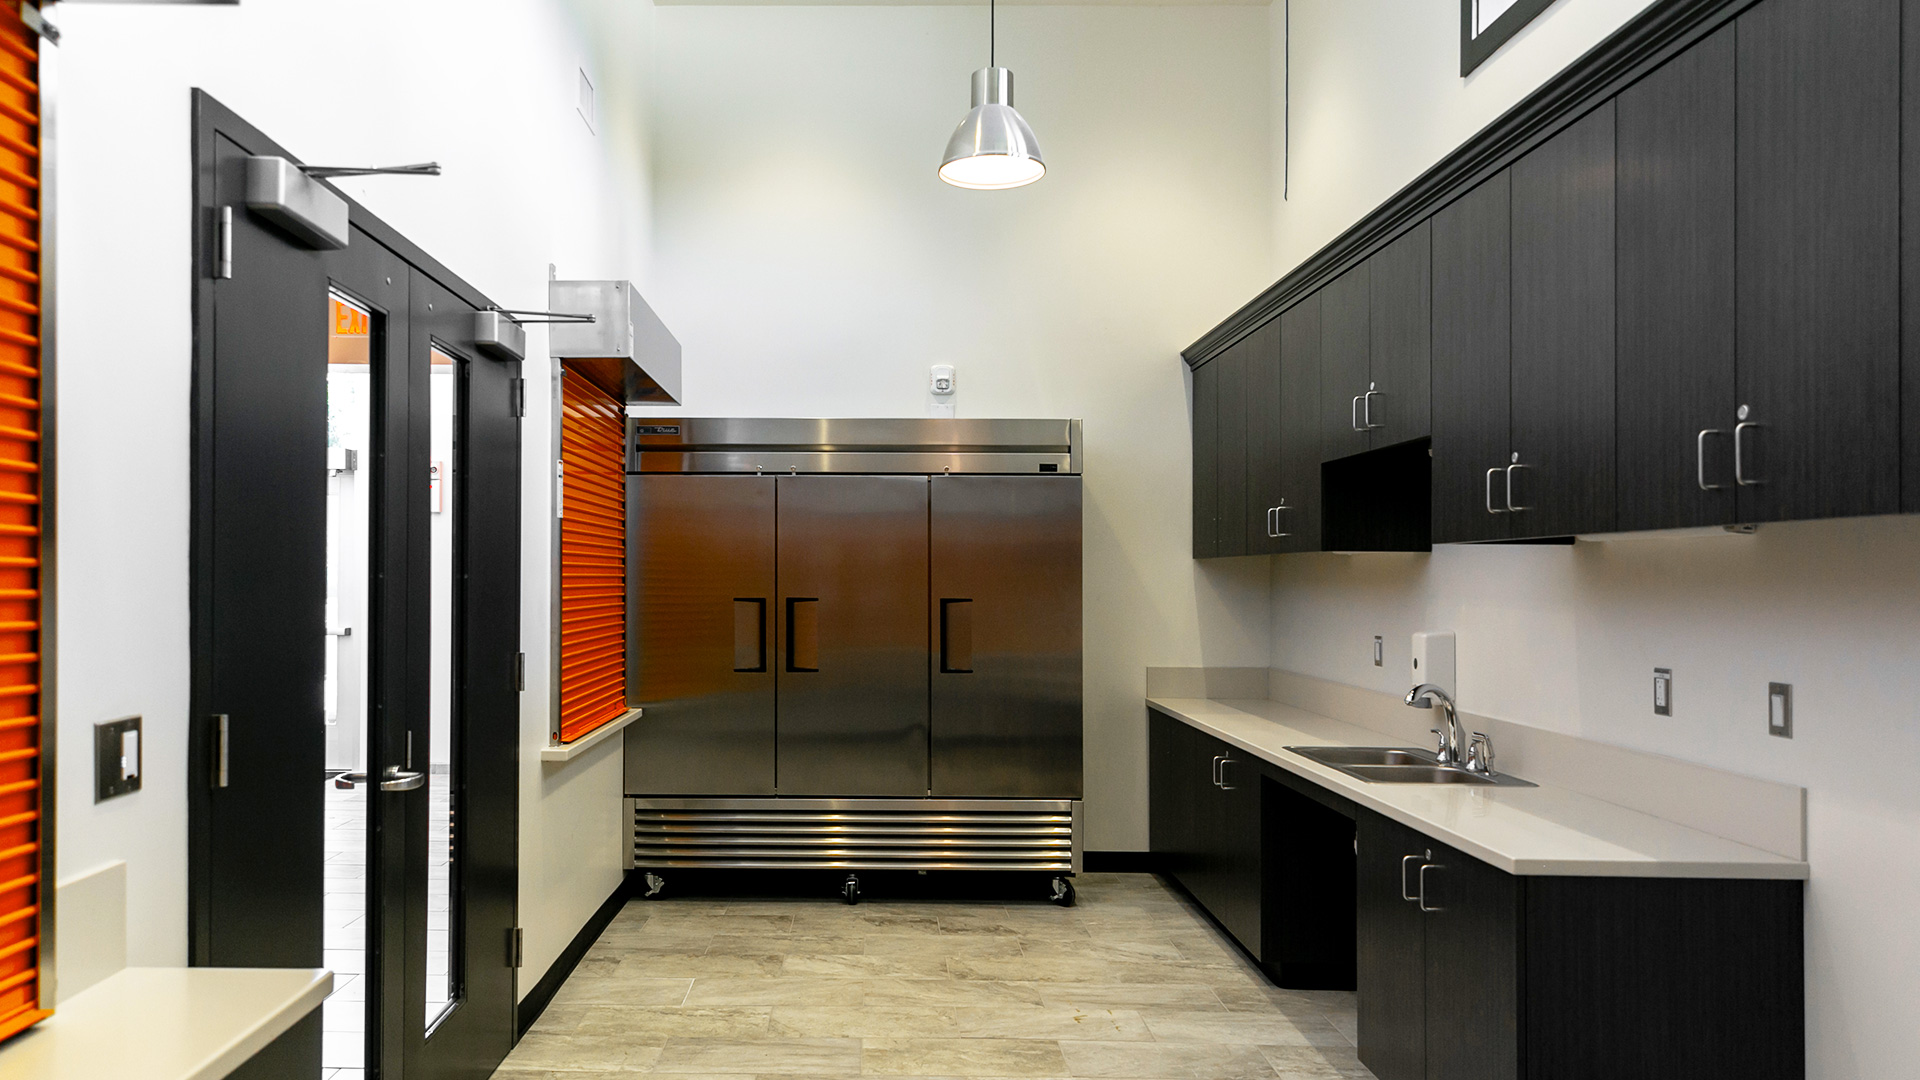 Full kitchen located in the snack shack. Double height white ceilings and walls with black cabinetry.